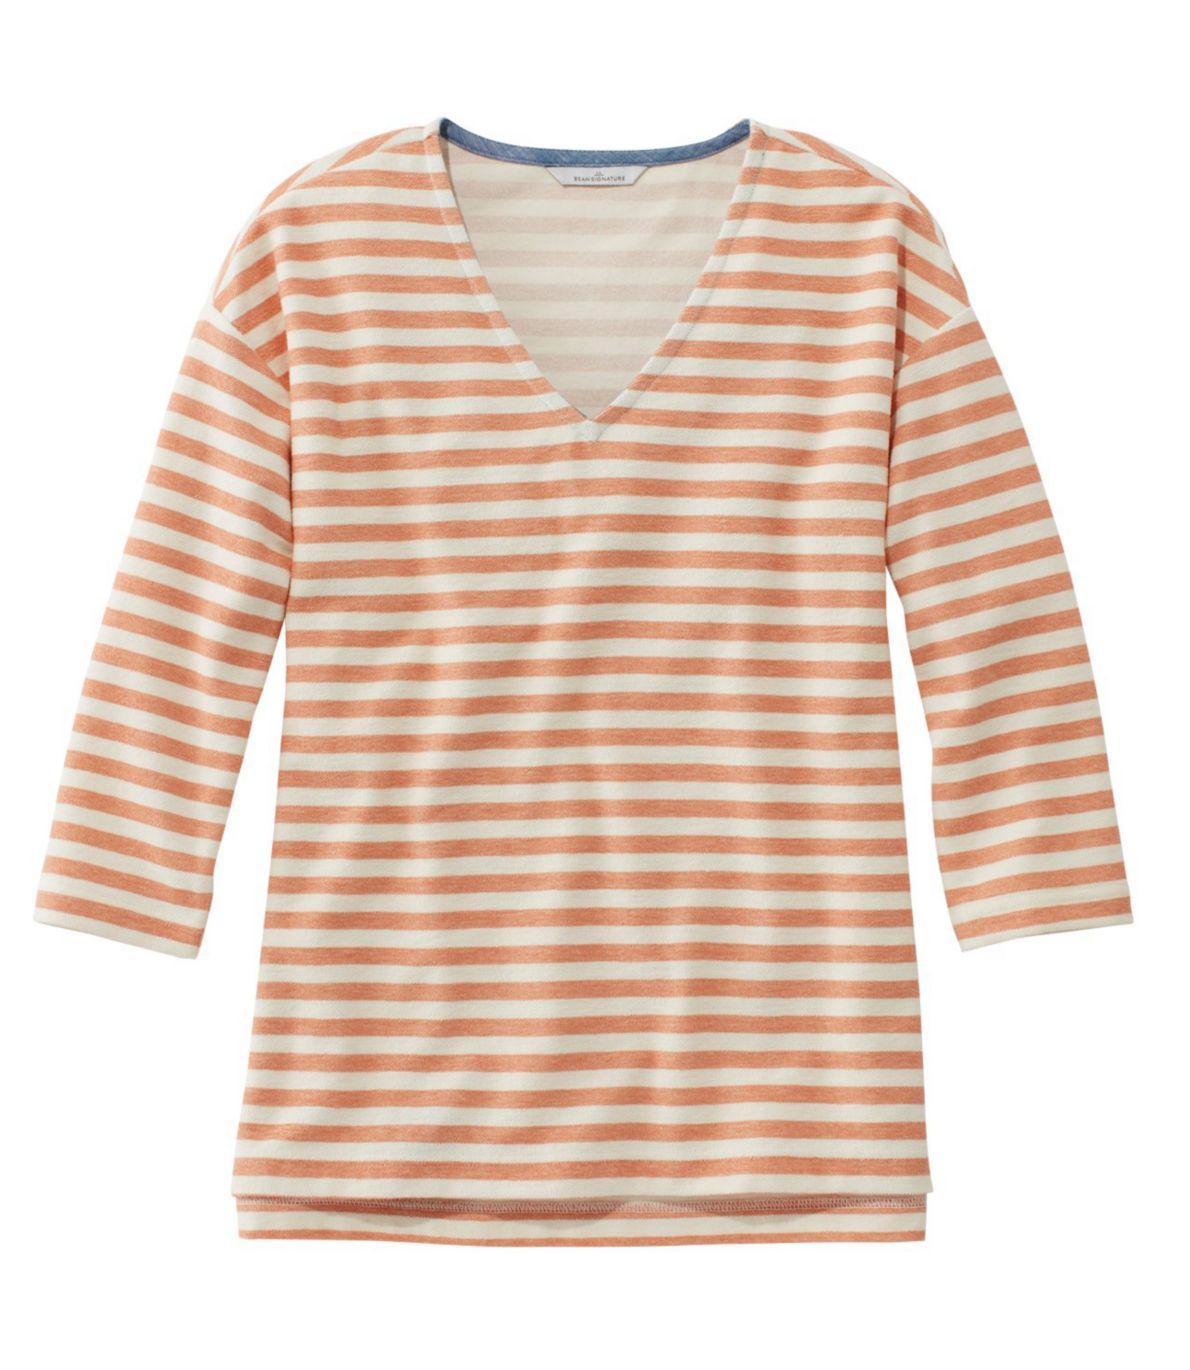 Women's Signature French Sailor Knit Tee, V-Neck